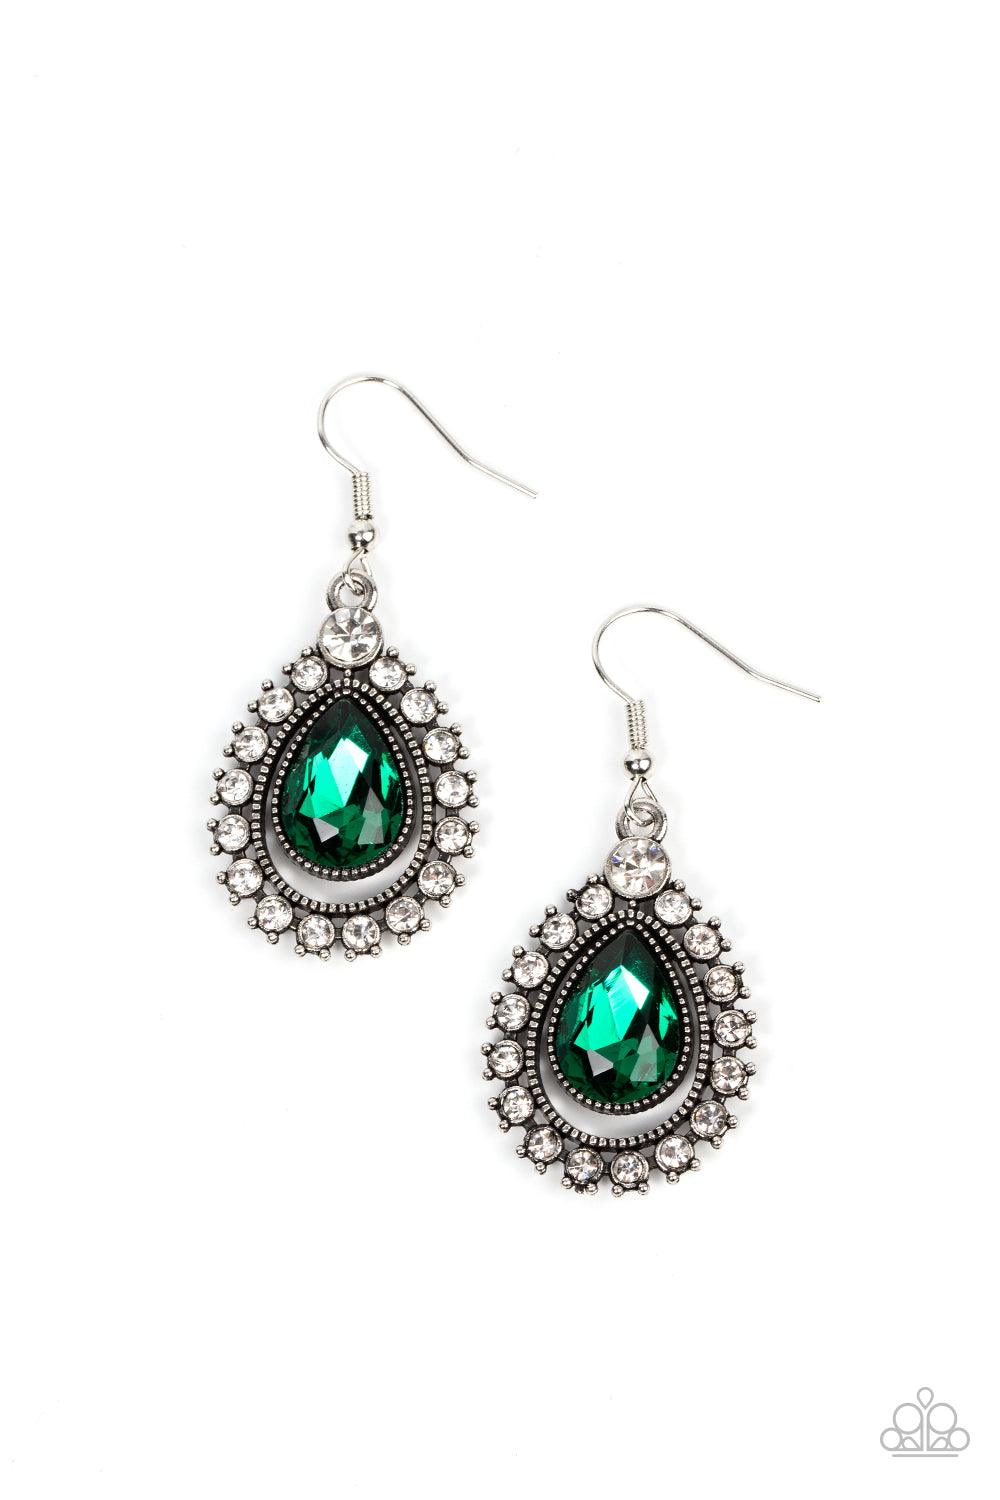 Paparazzi Accessories - Divinely Duchess - Green Earrings - Bling by JessieK